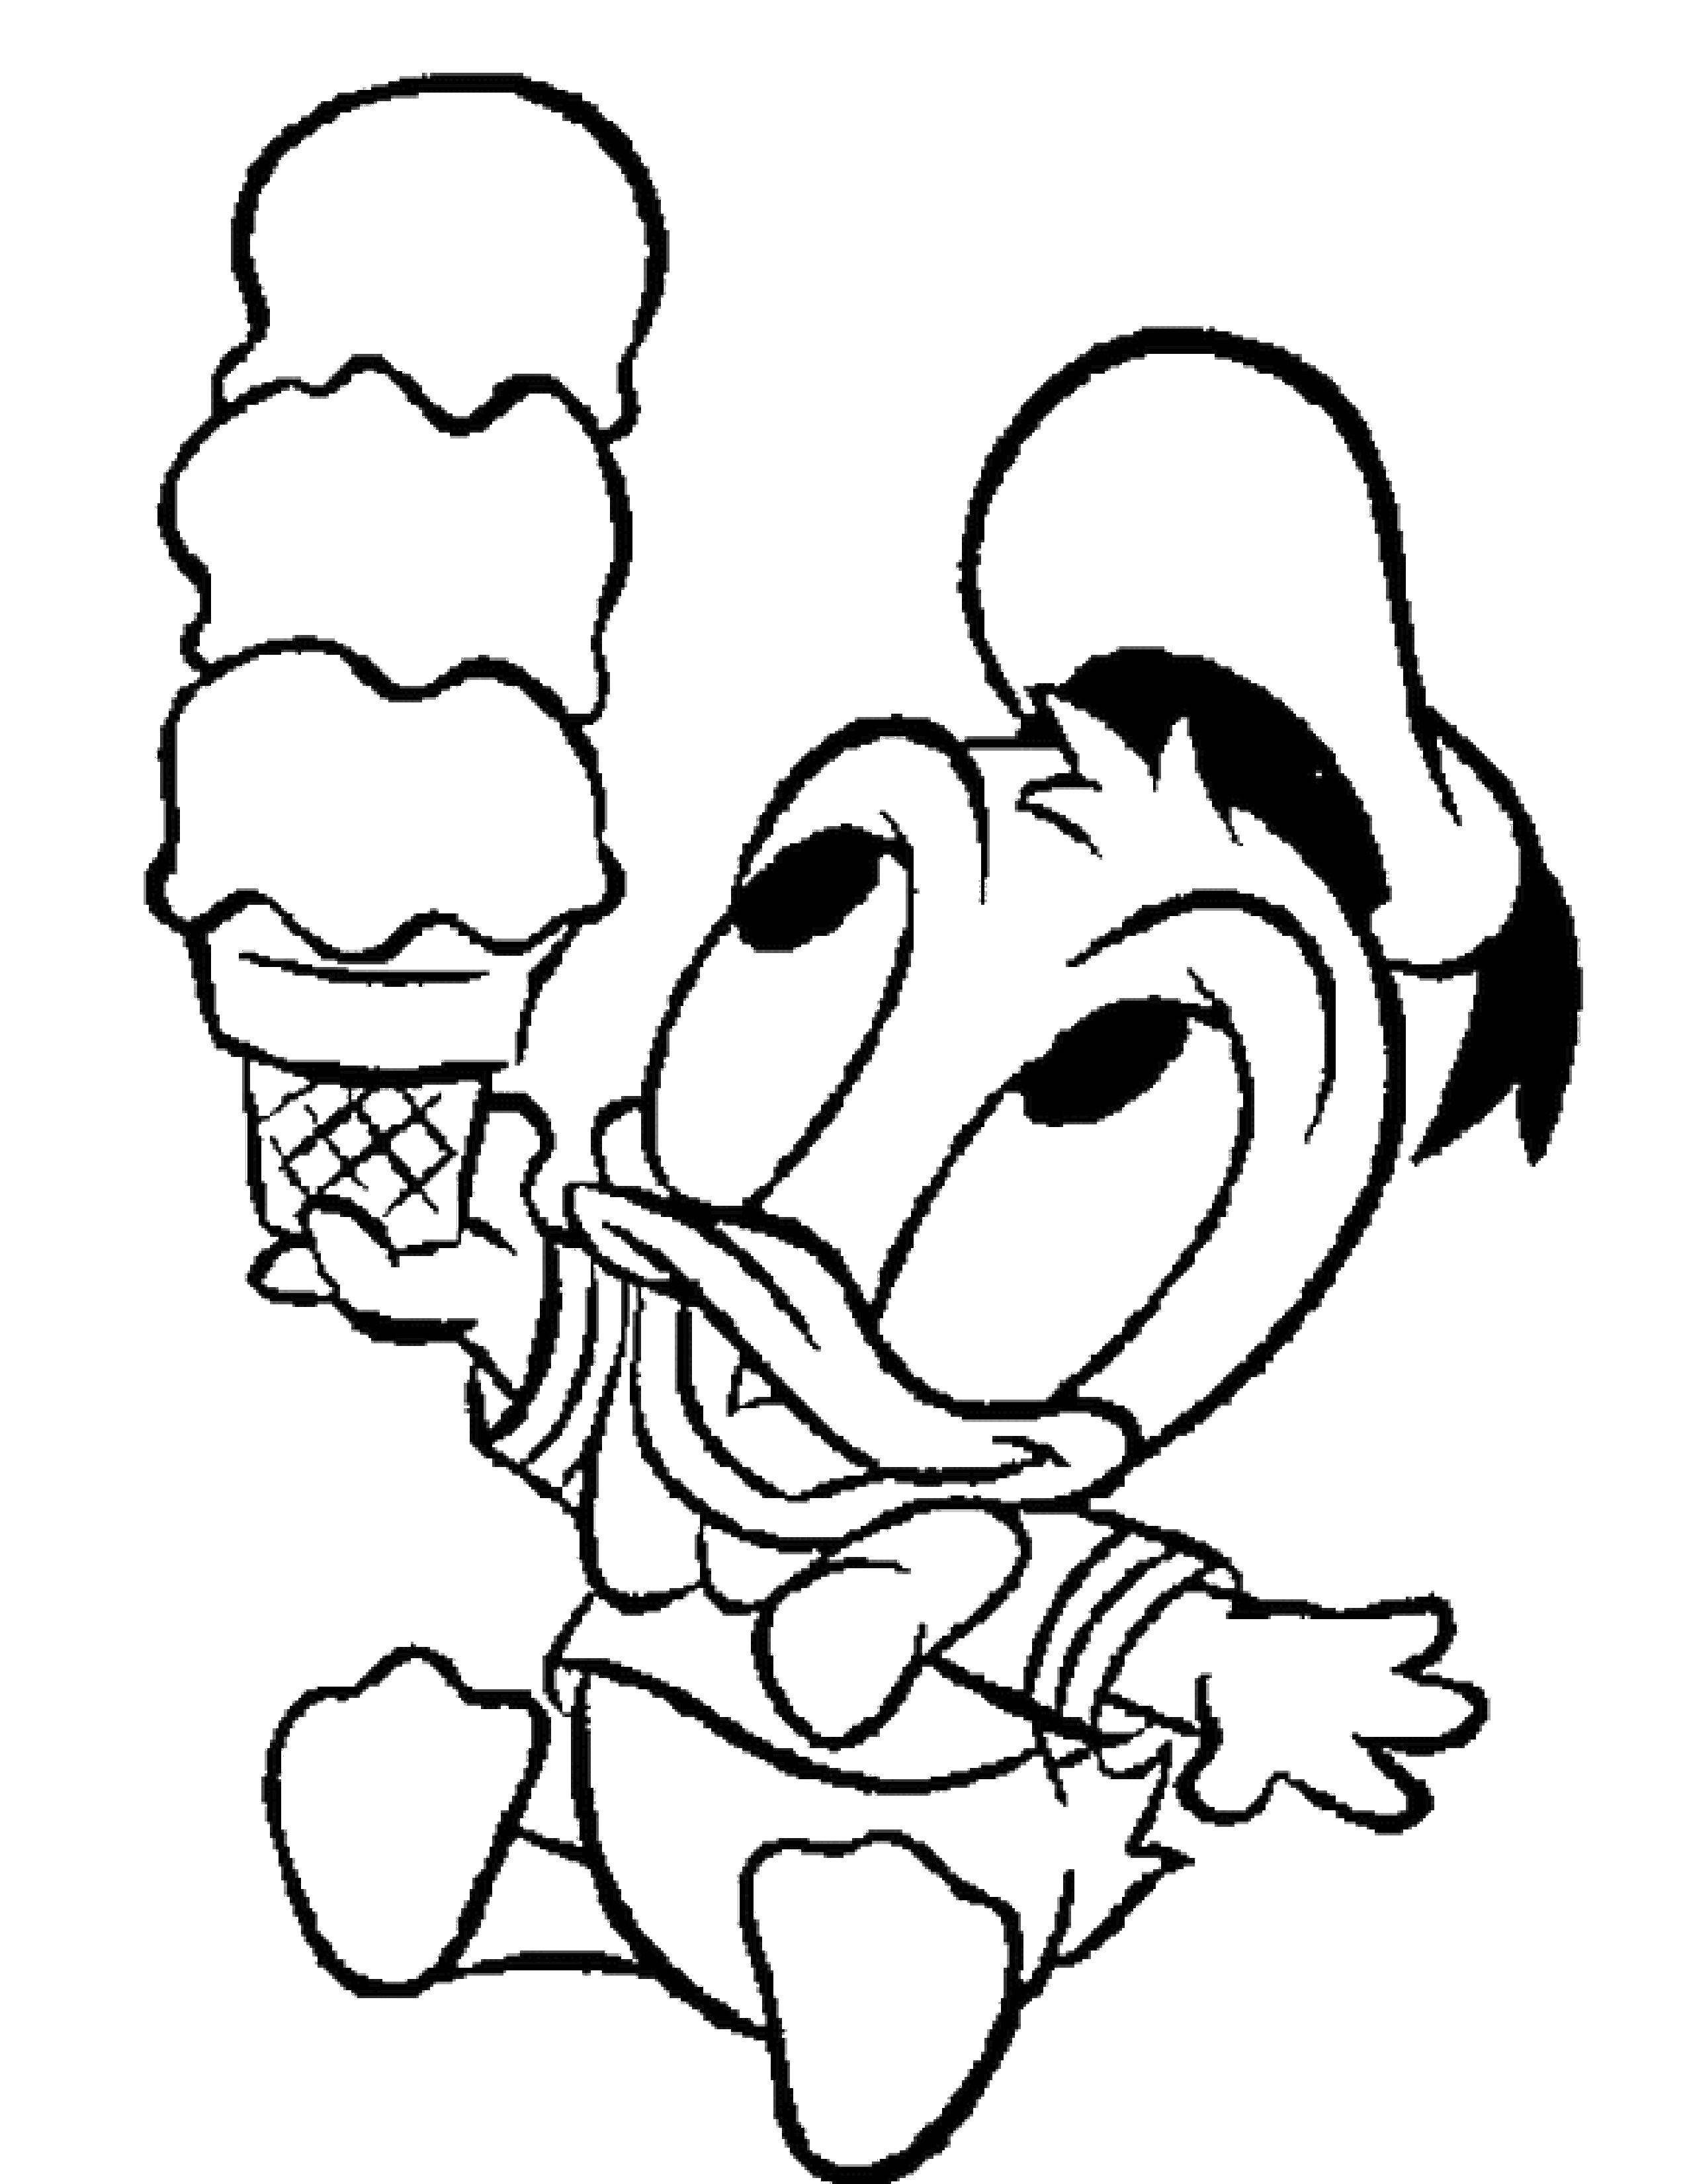 Coloring Nephew of Donald. Category Disney coloring pages. Tags:  Disney, Ducktales, Donald Duck.